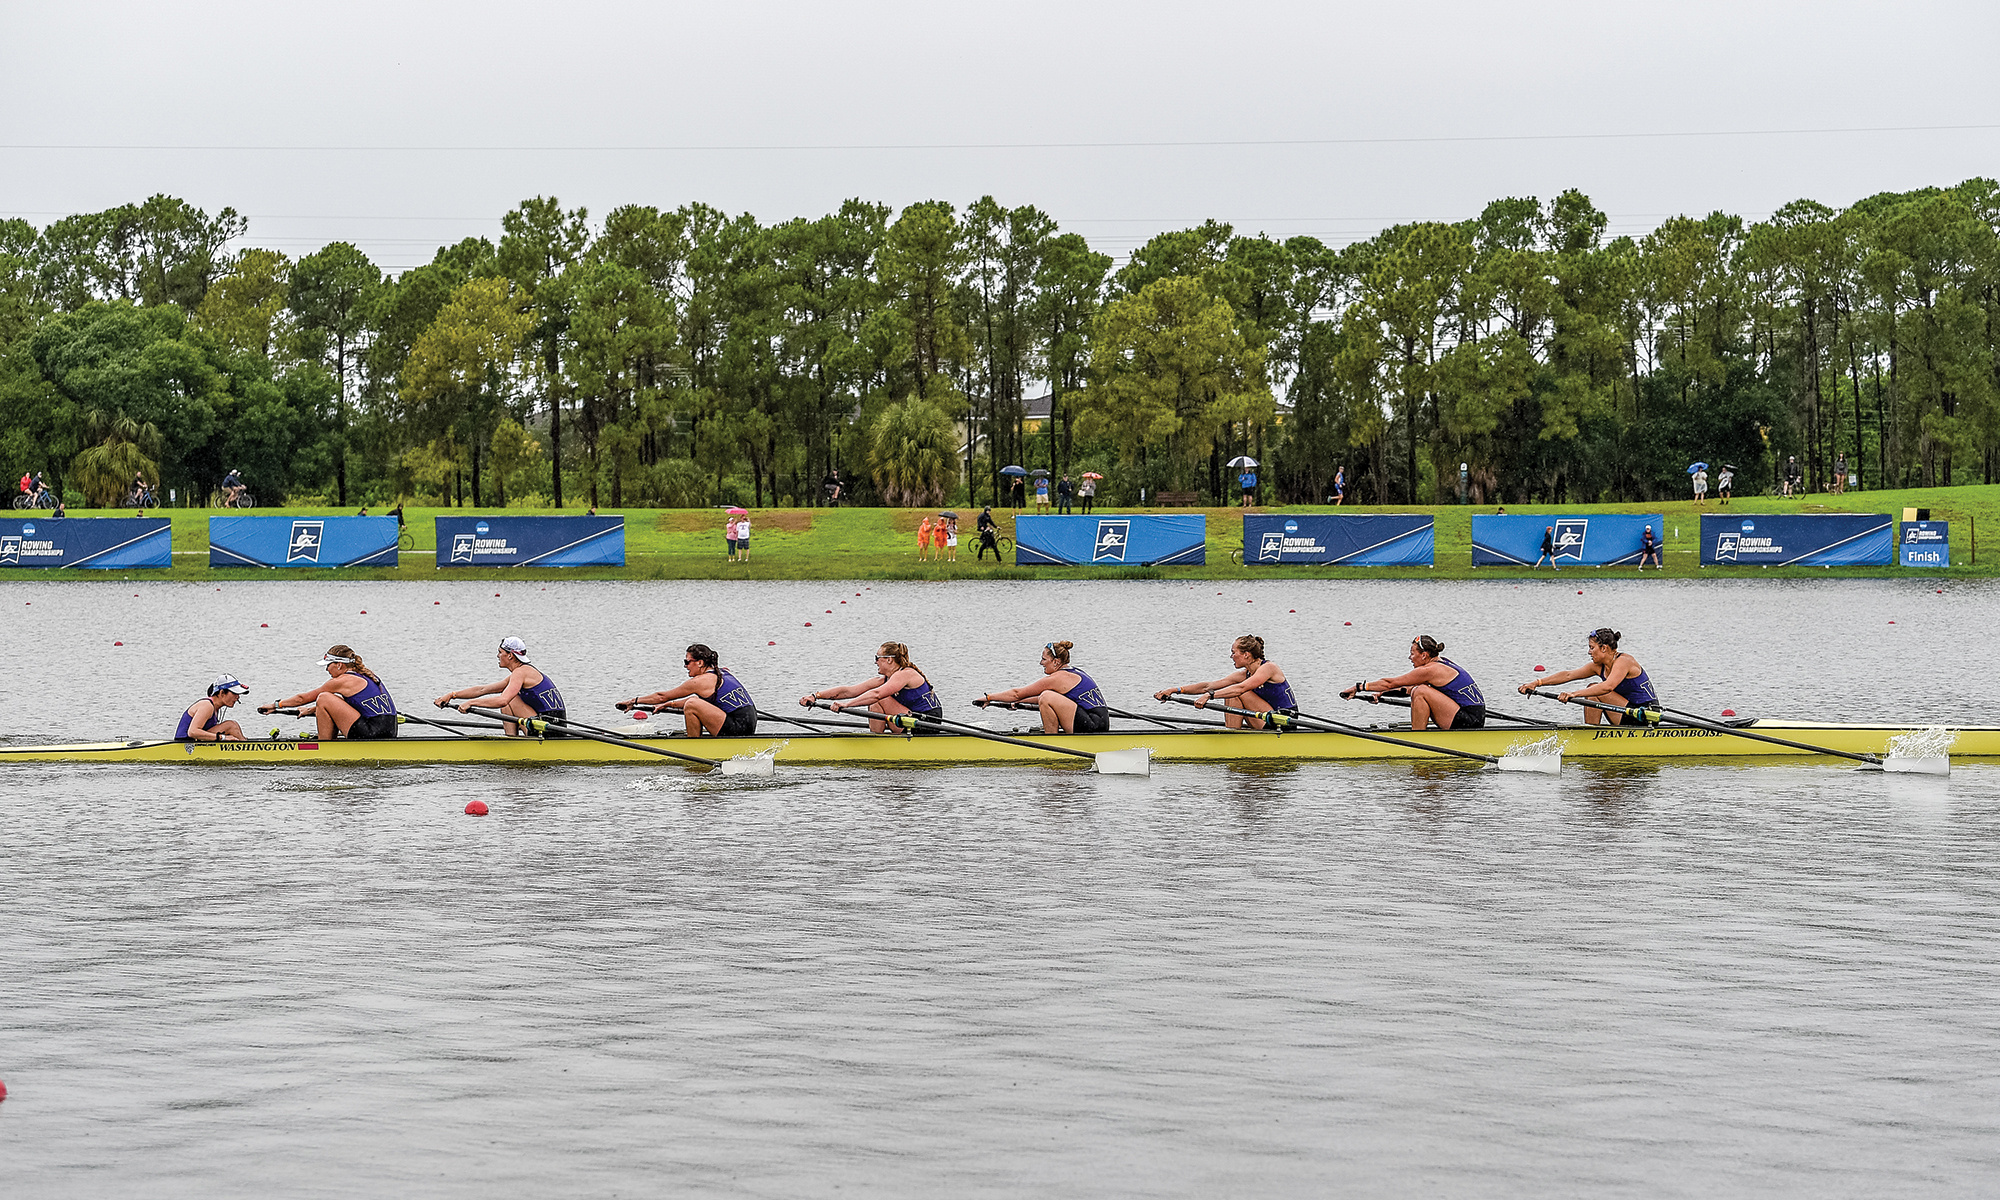 Rowing: A group sweep pulling event, Competitive boating, University of Washington rowers. 2000x1200 HD Background.